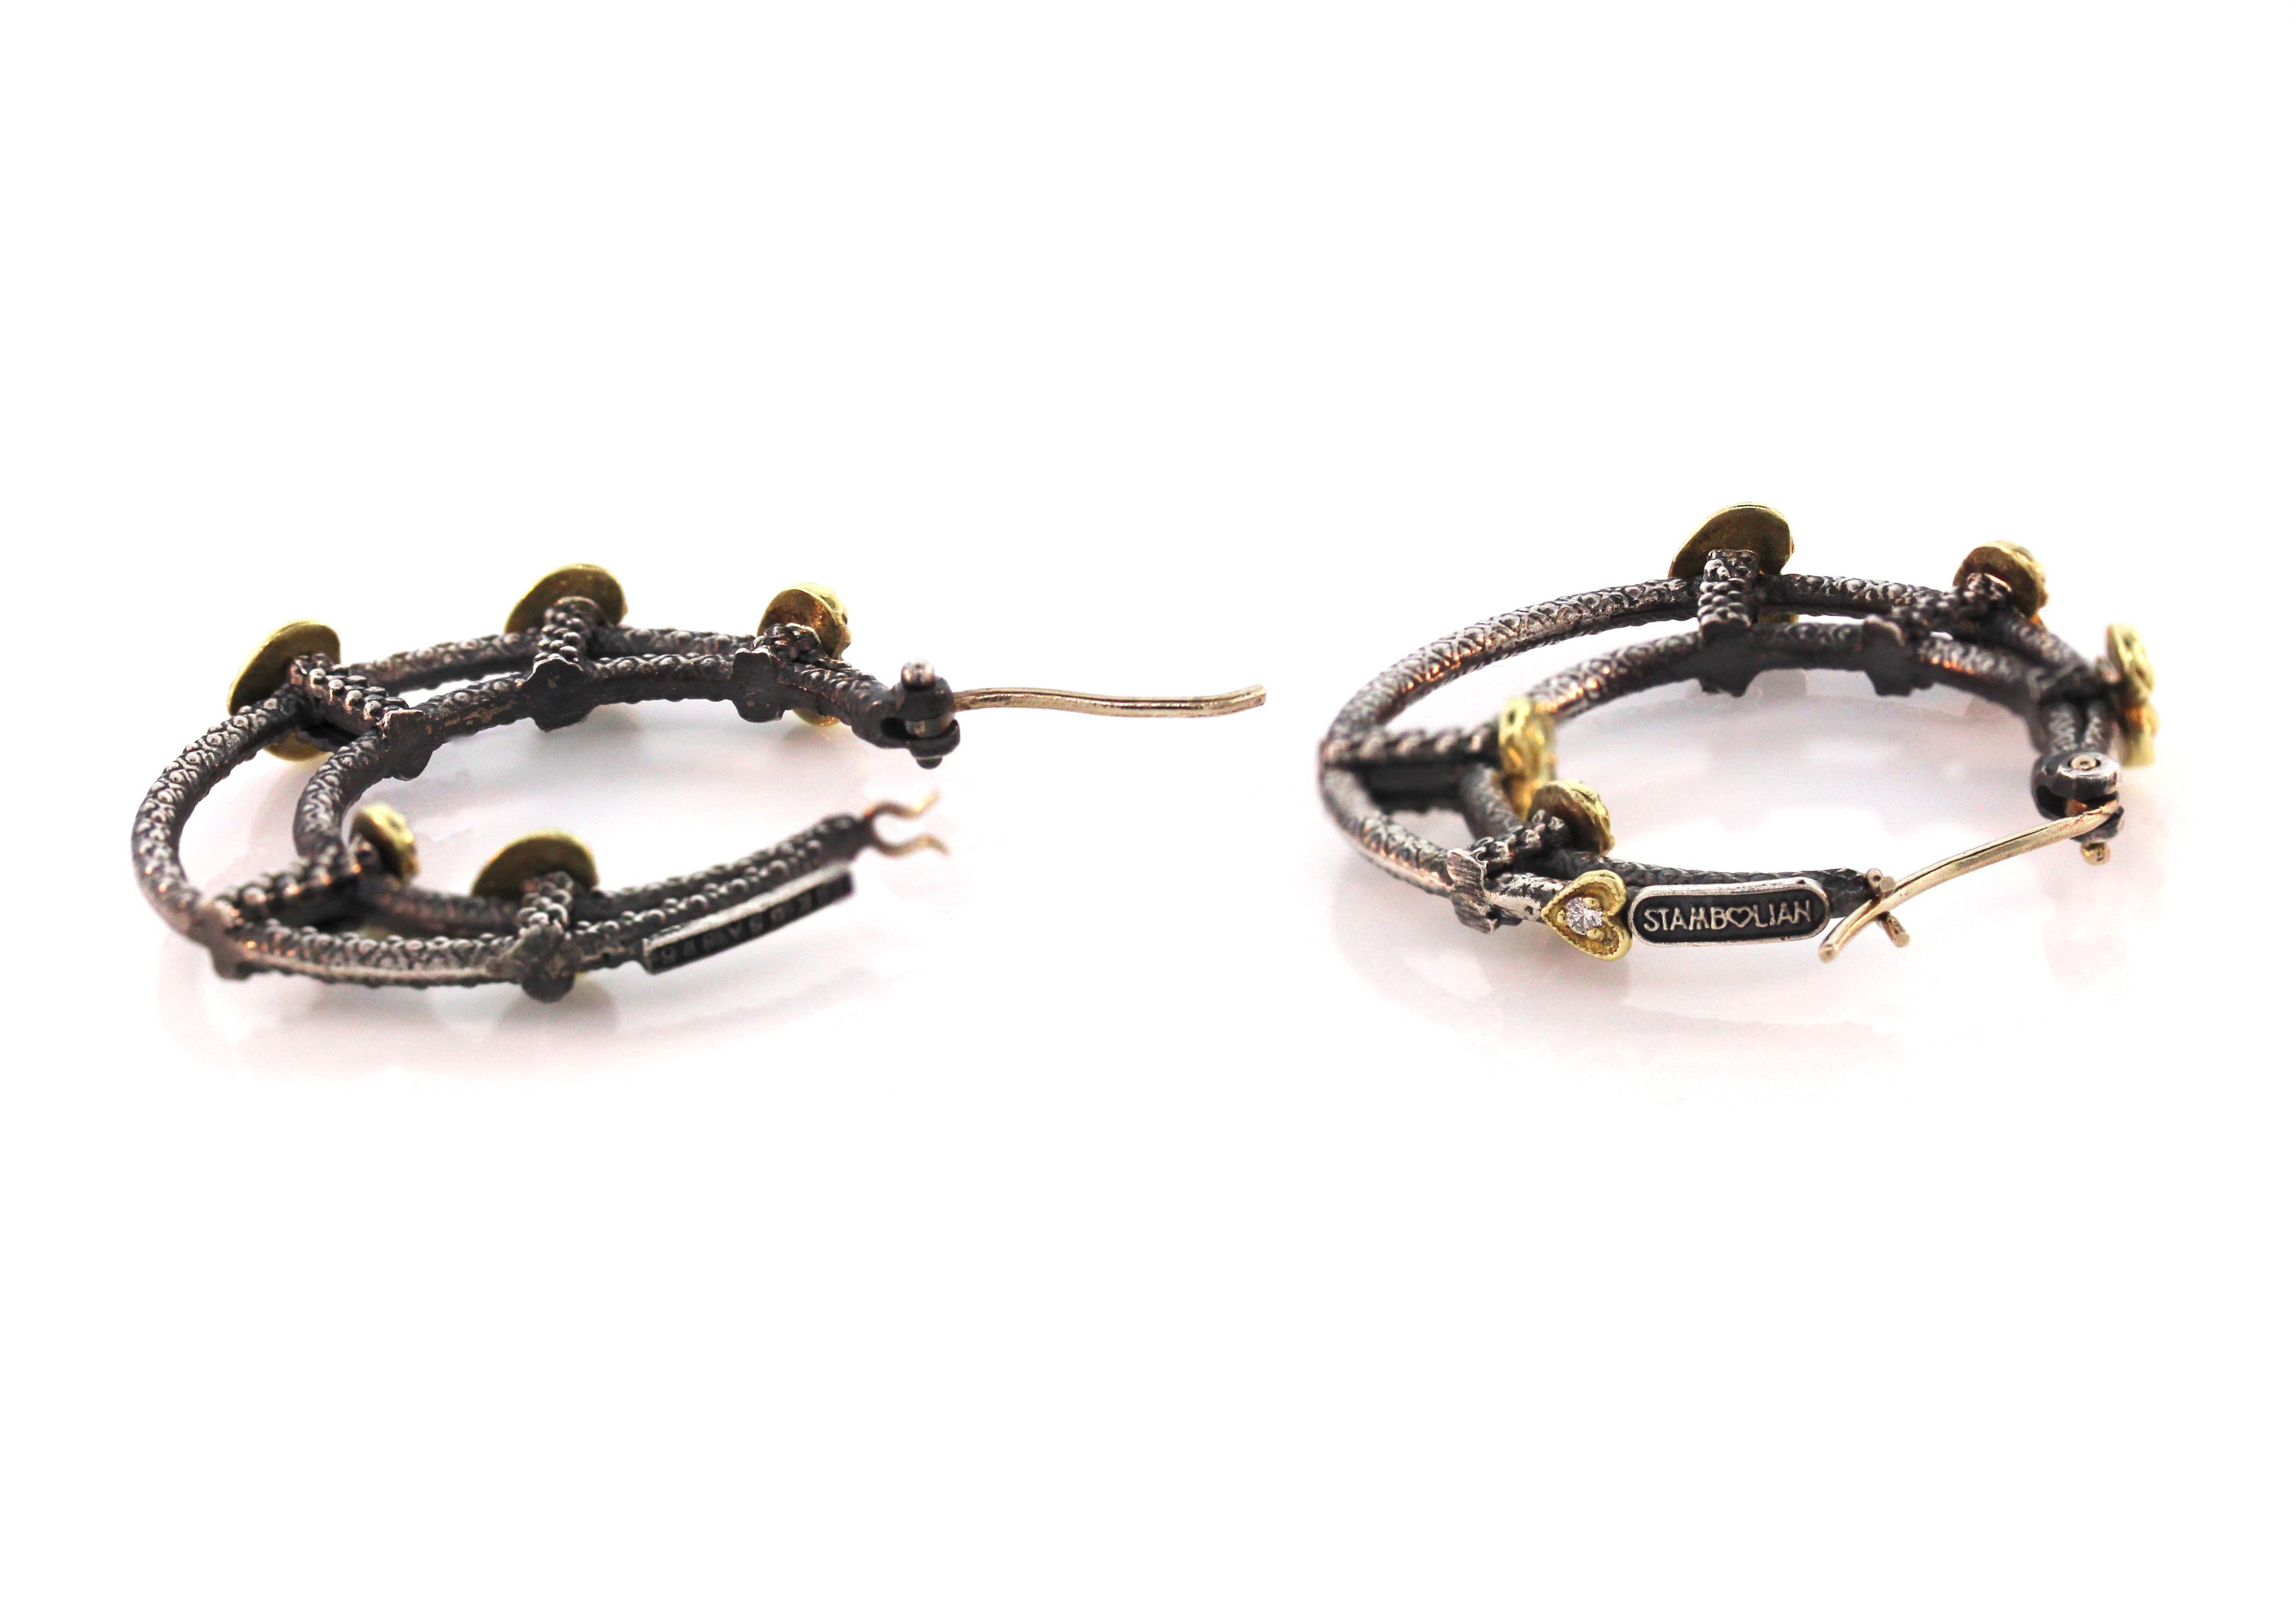 Women's Double Hoop Earrings with Sterling Silver and Gold Stambolian